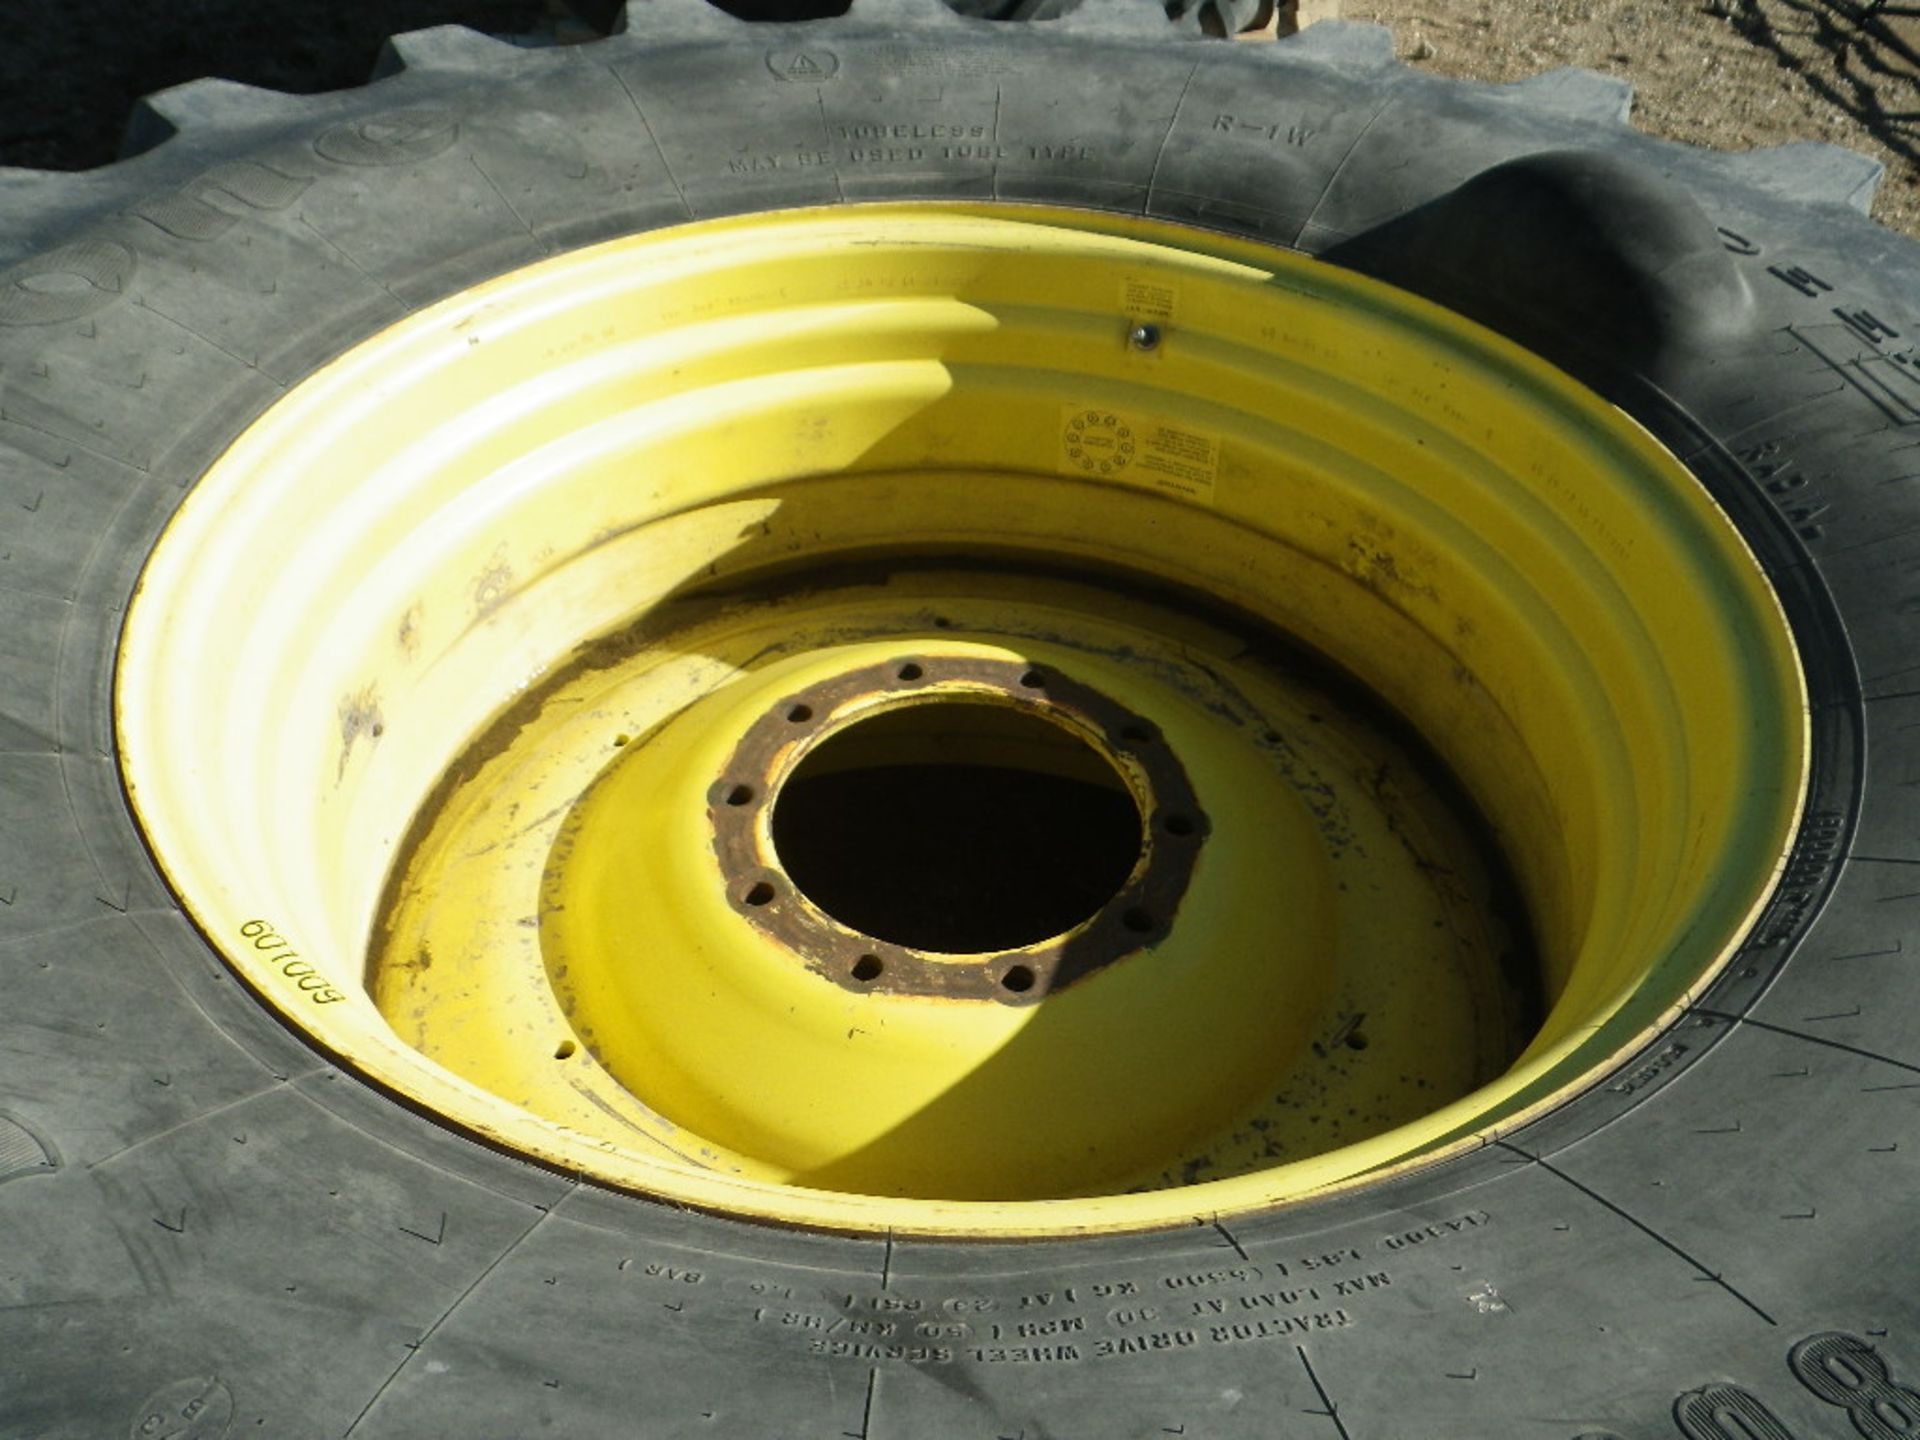 (34) 1 FS 800/70R38 DEFECTIVE TIRE ON 10 HOLE TRACTOR RIM, 11" PILOT HOLE - Image 2 of 5